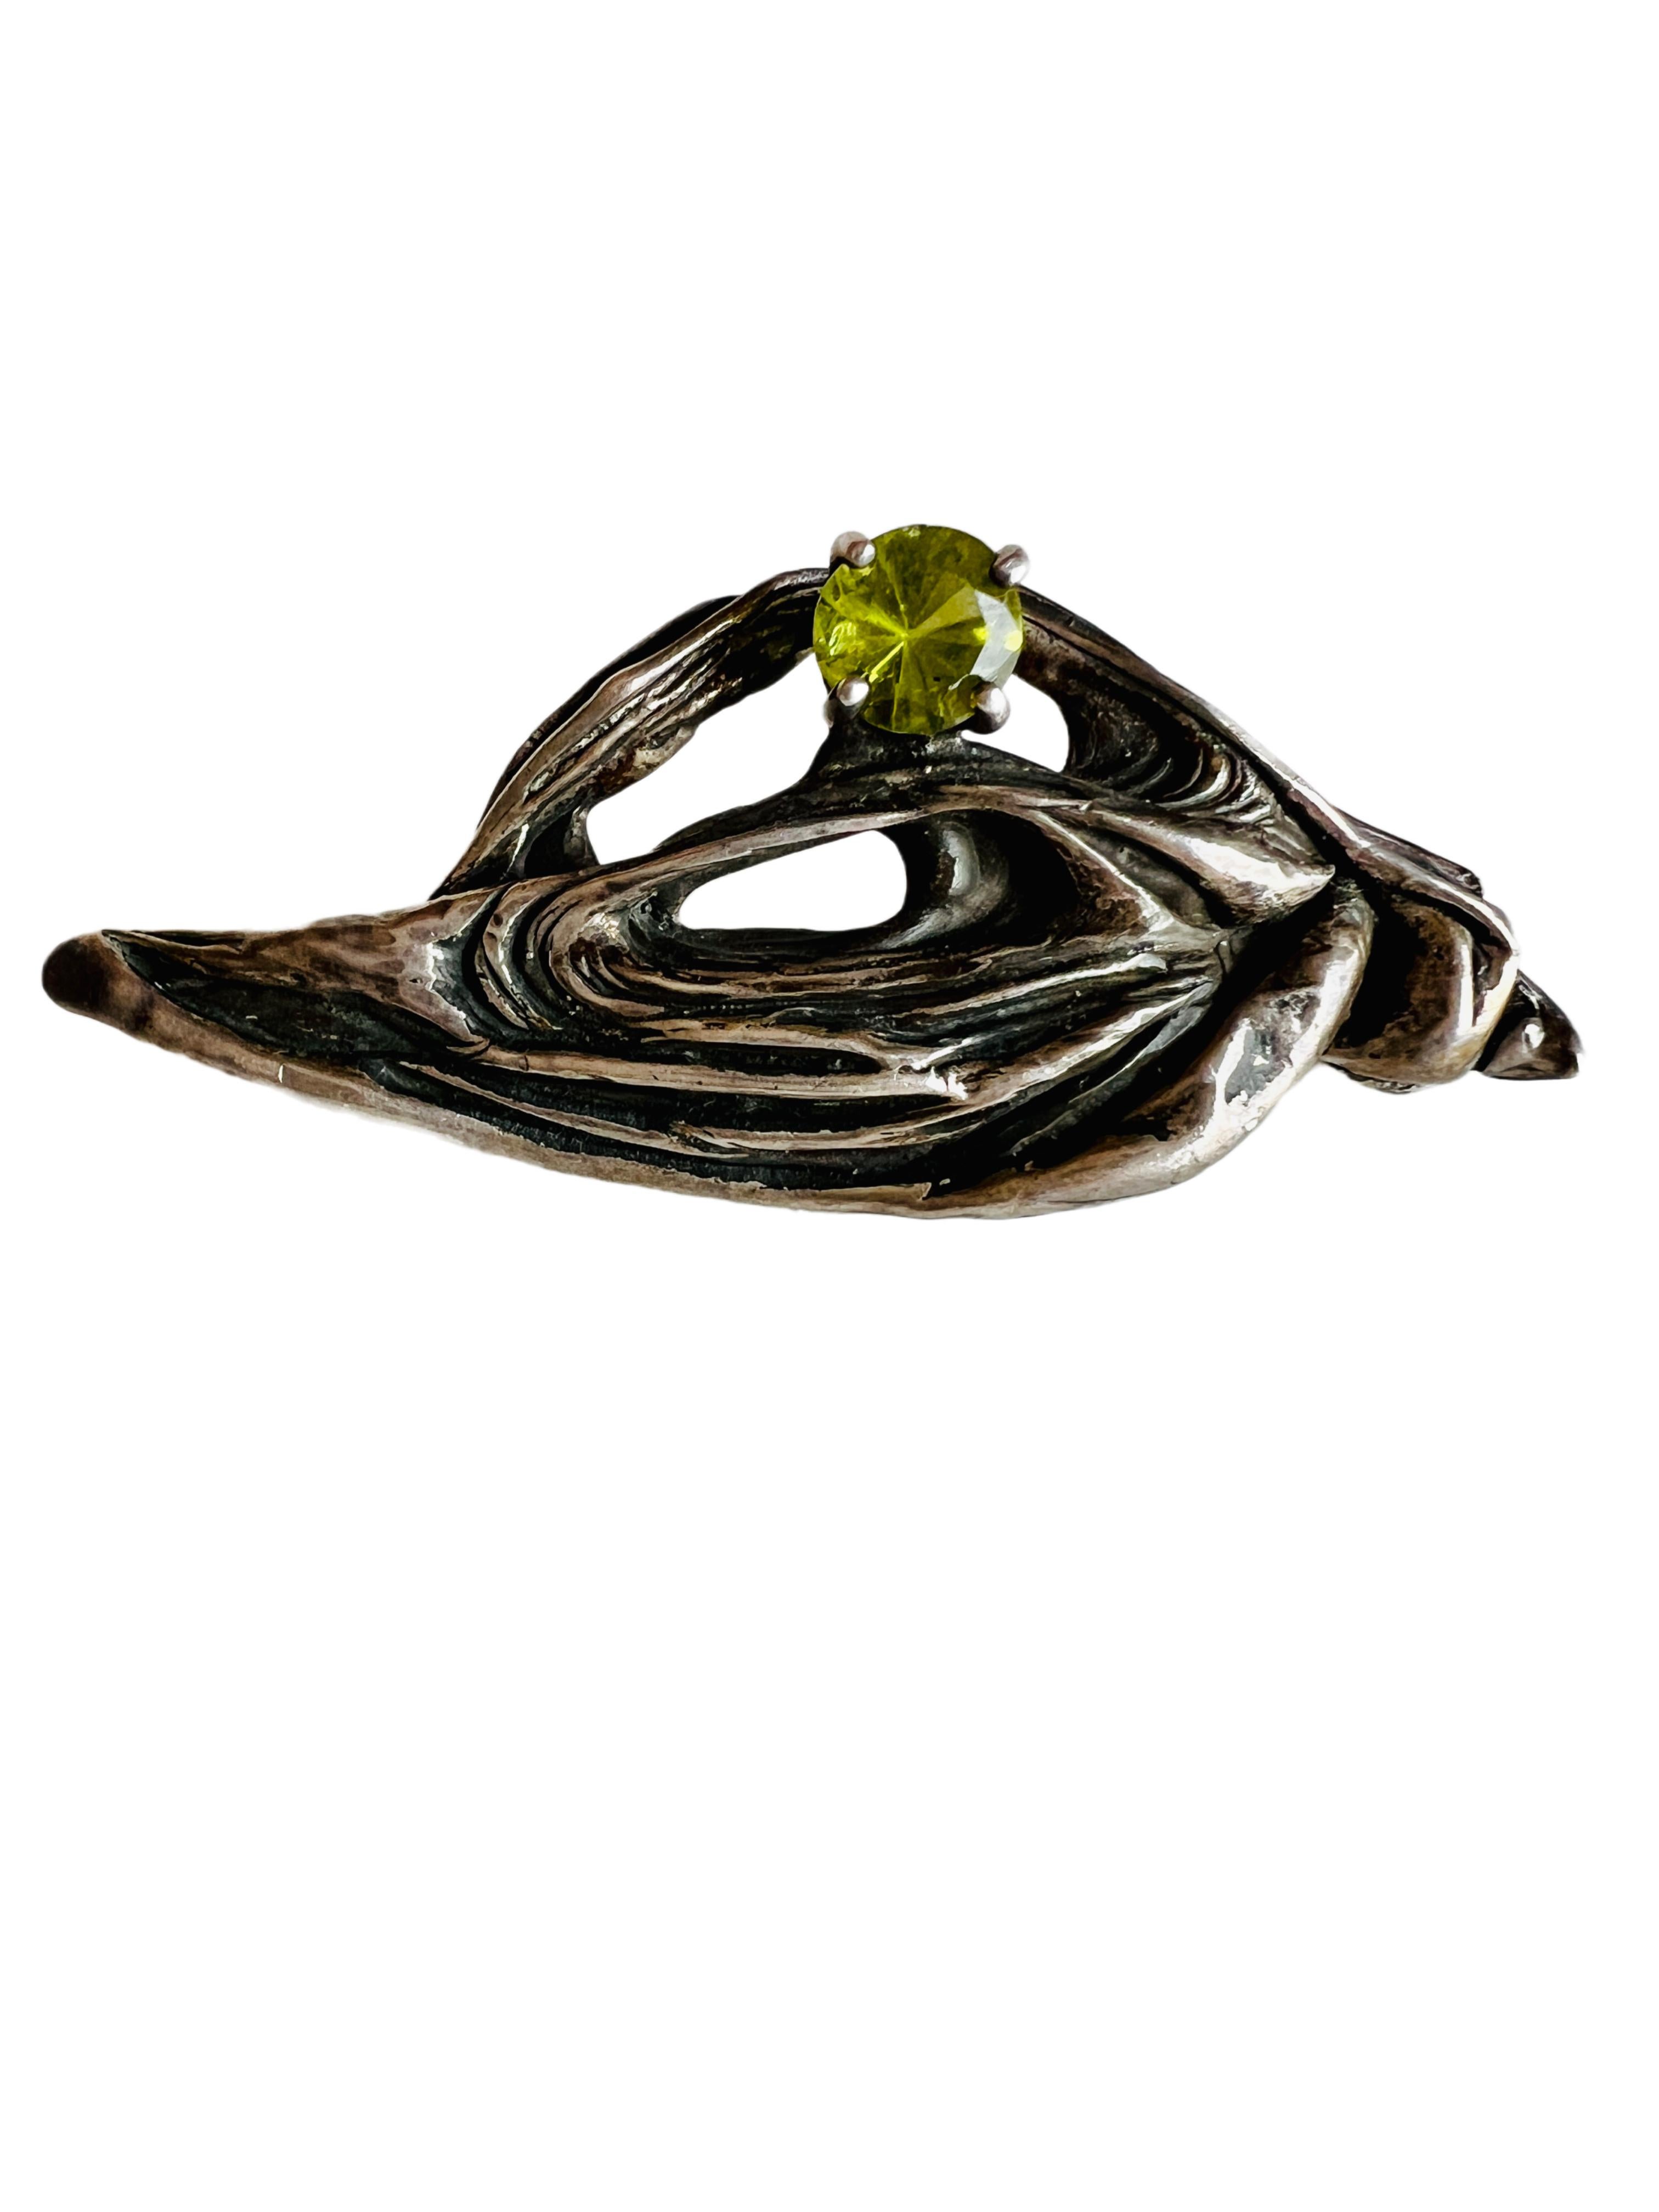 Contemporary Vintage Erlin Sterling Silver Green Peridot Gemstone Modernist Brooch Pin For Sale